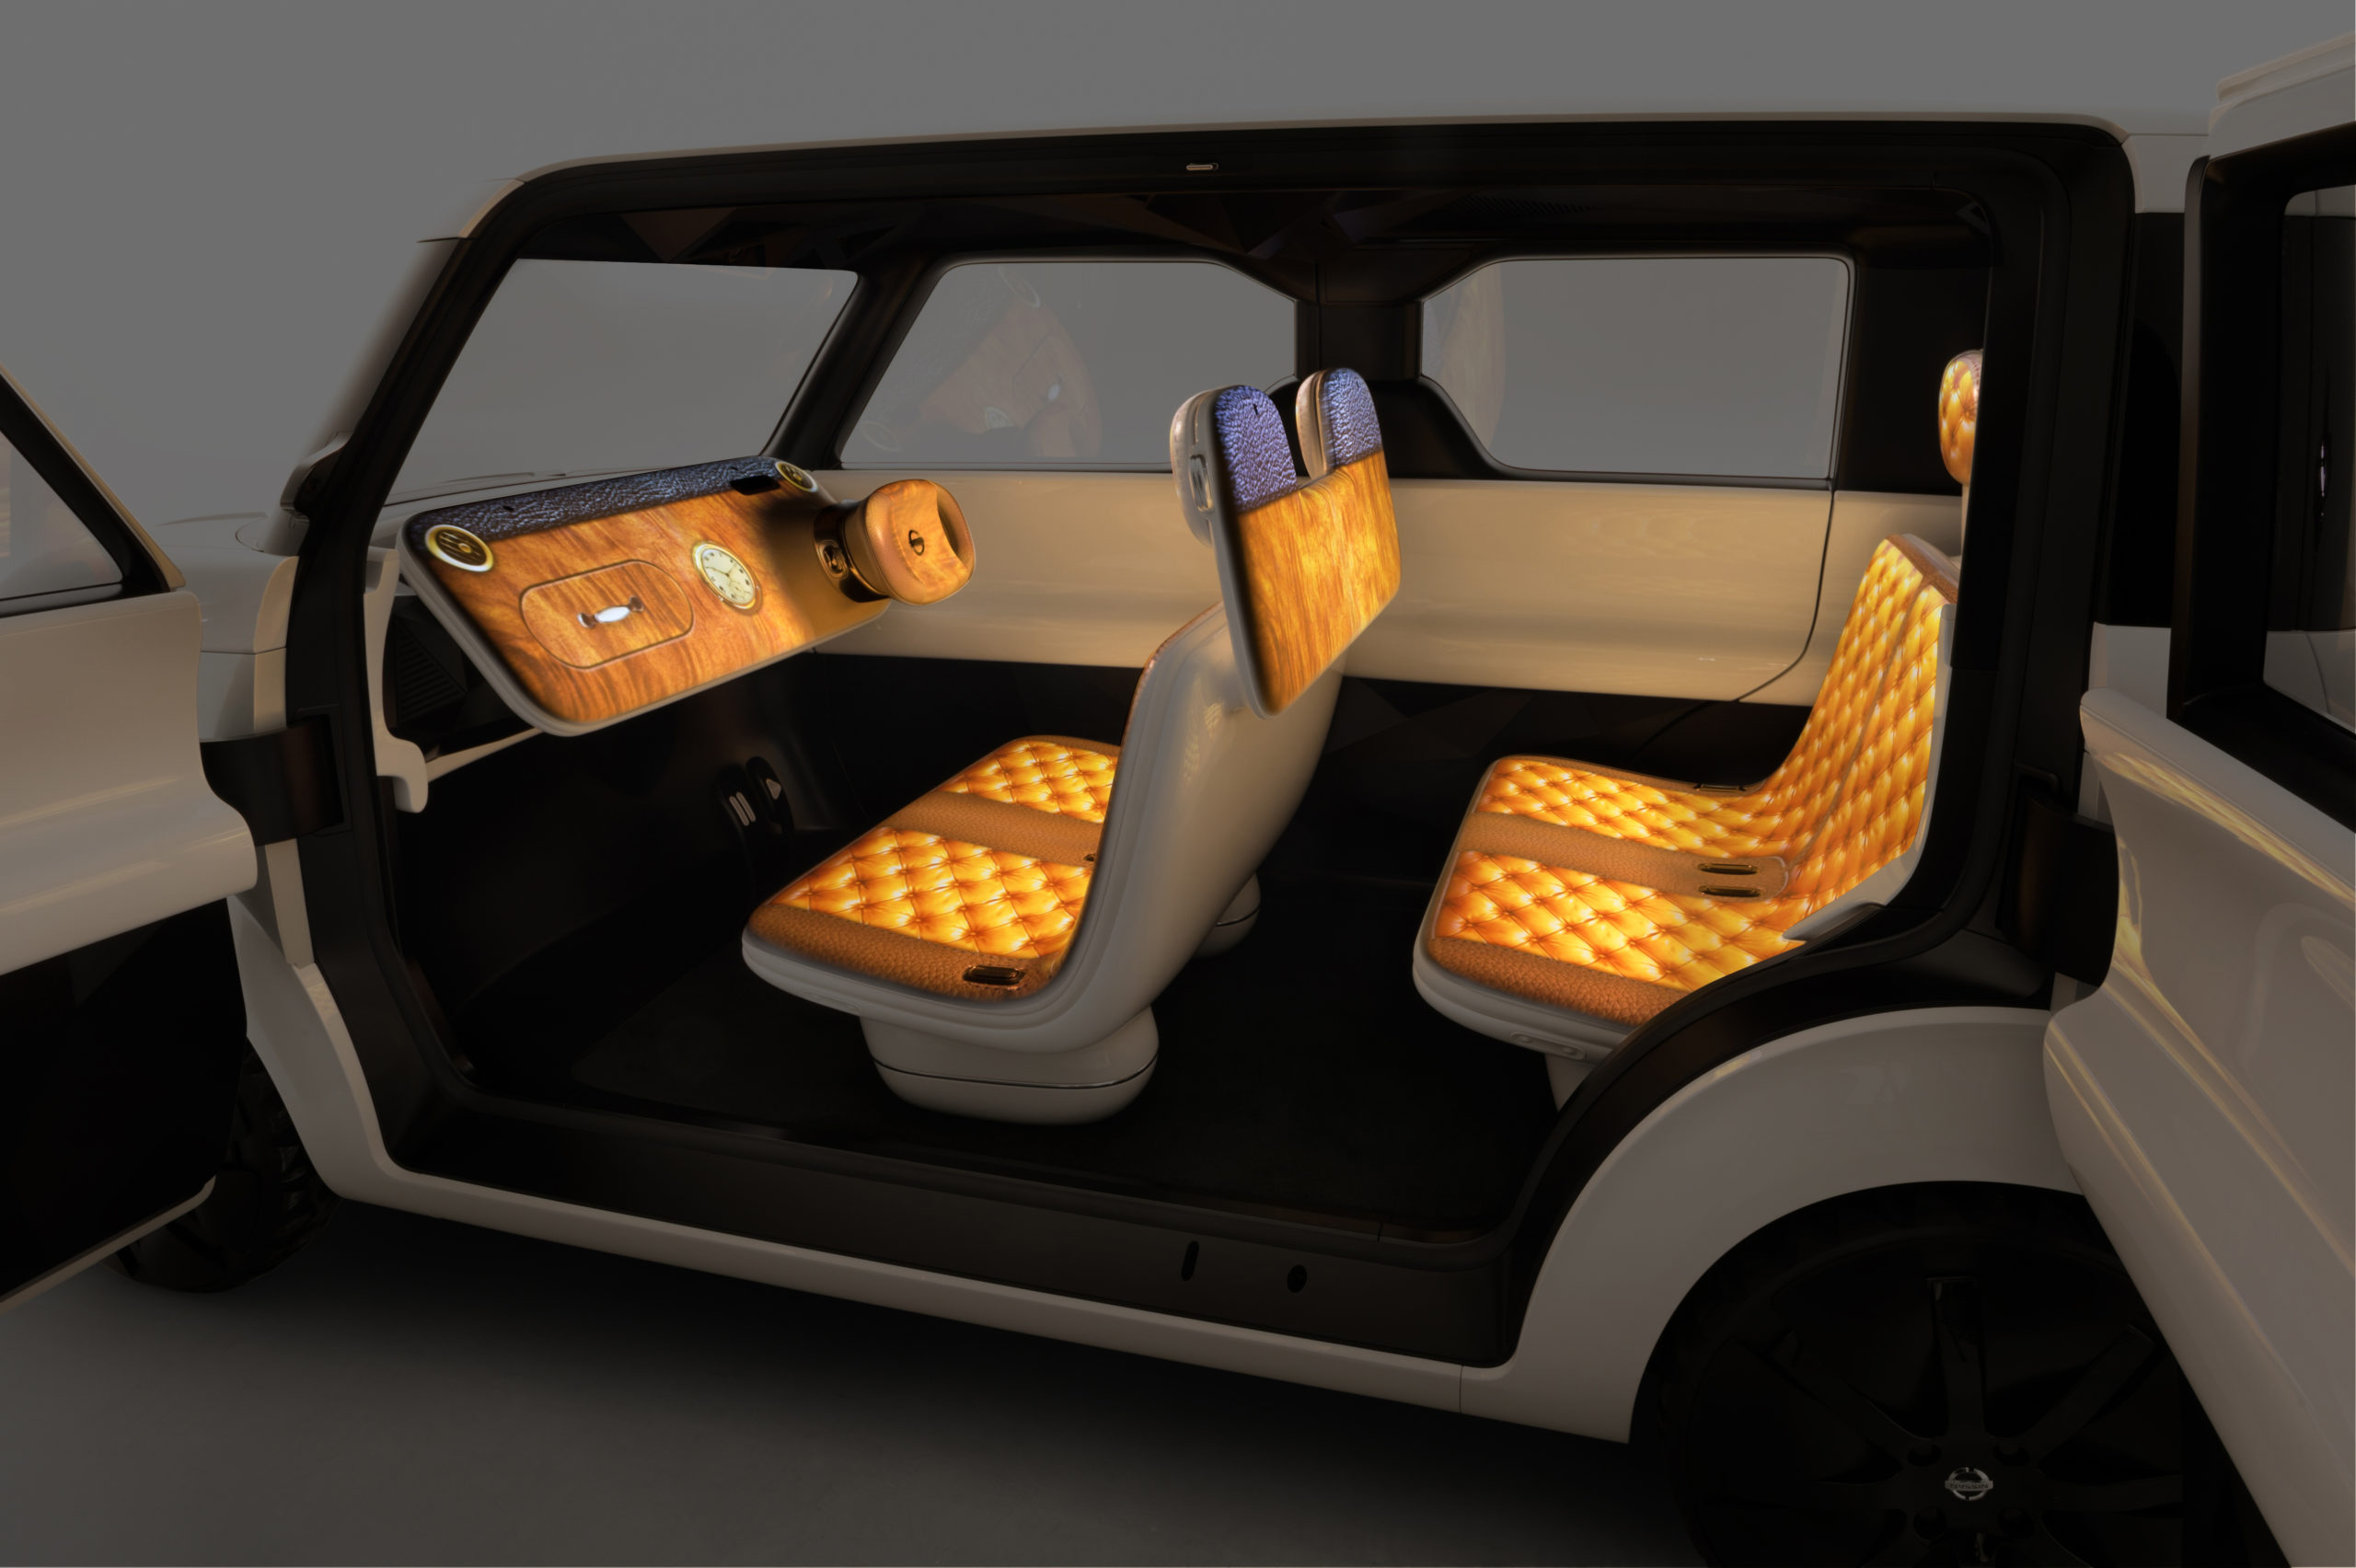 Just About Every Surface Inside Nissan’s Concept Car Is A Screen Display